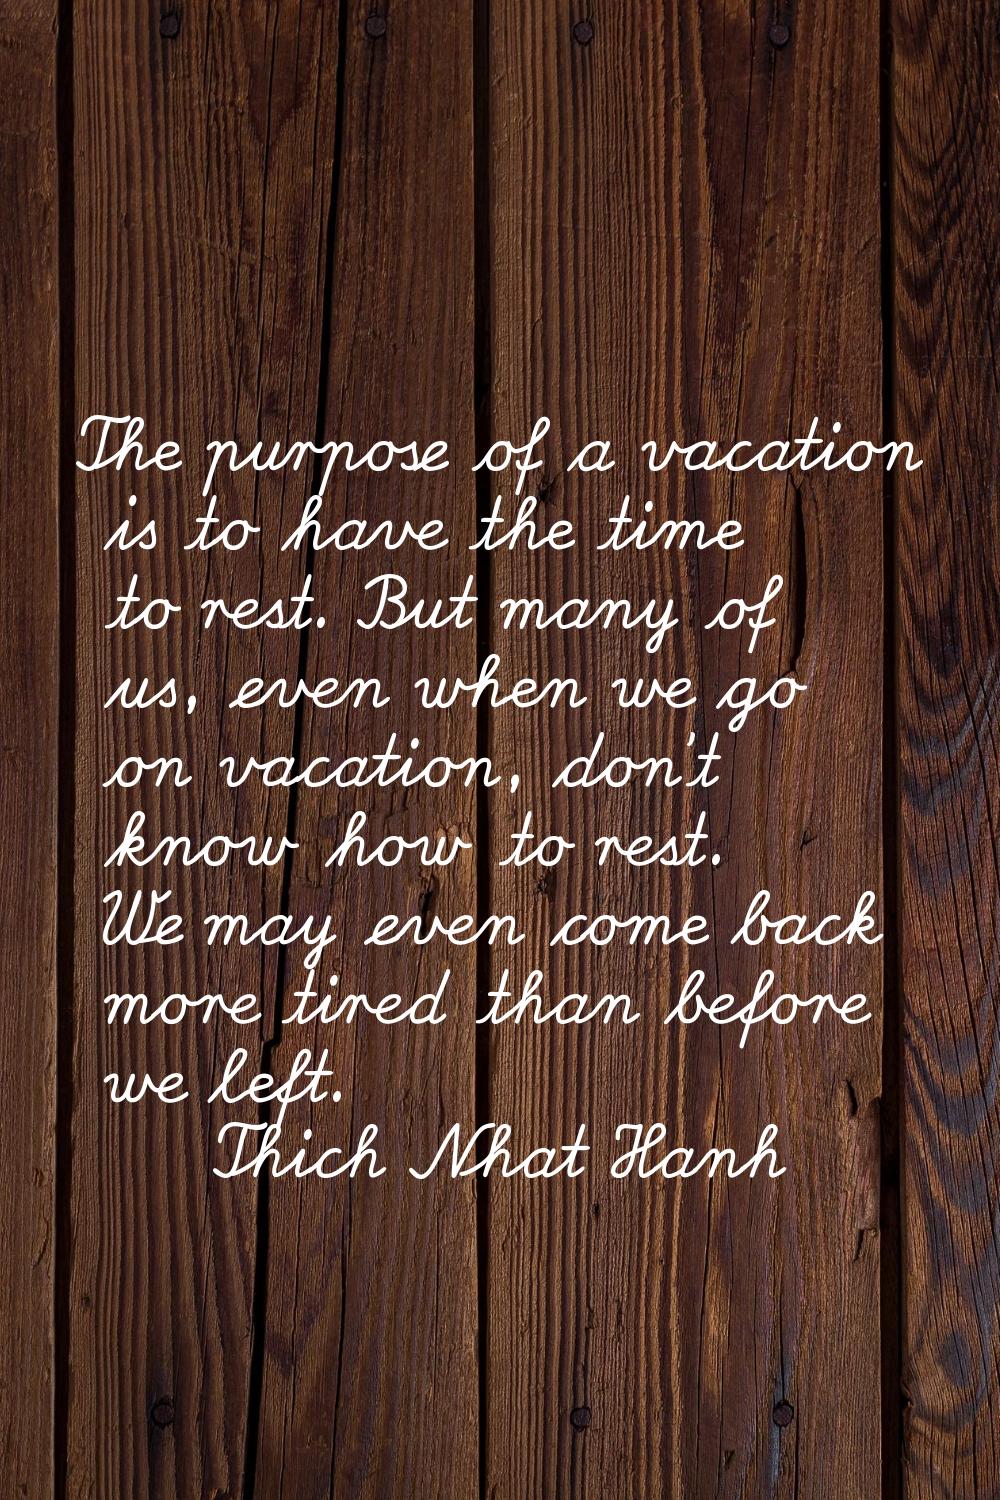 The purpose of a vacation is to have the time to rest. But many of us, even when we go on vacation,